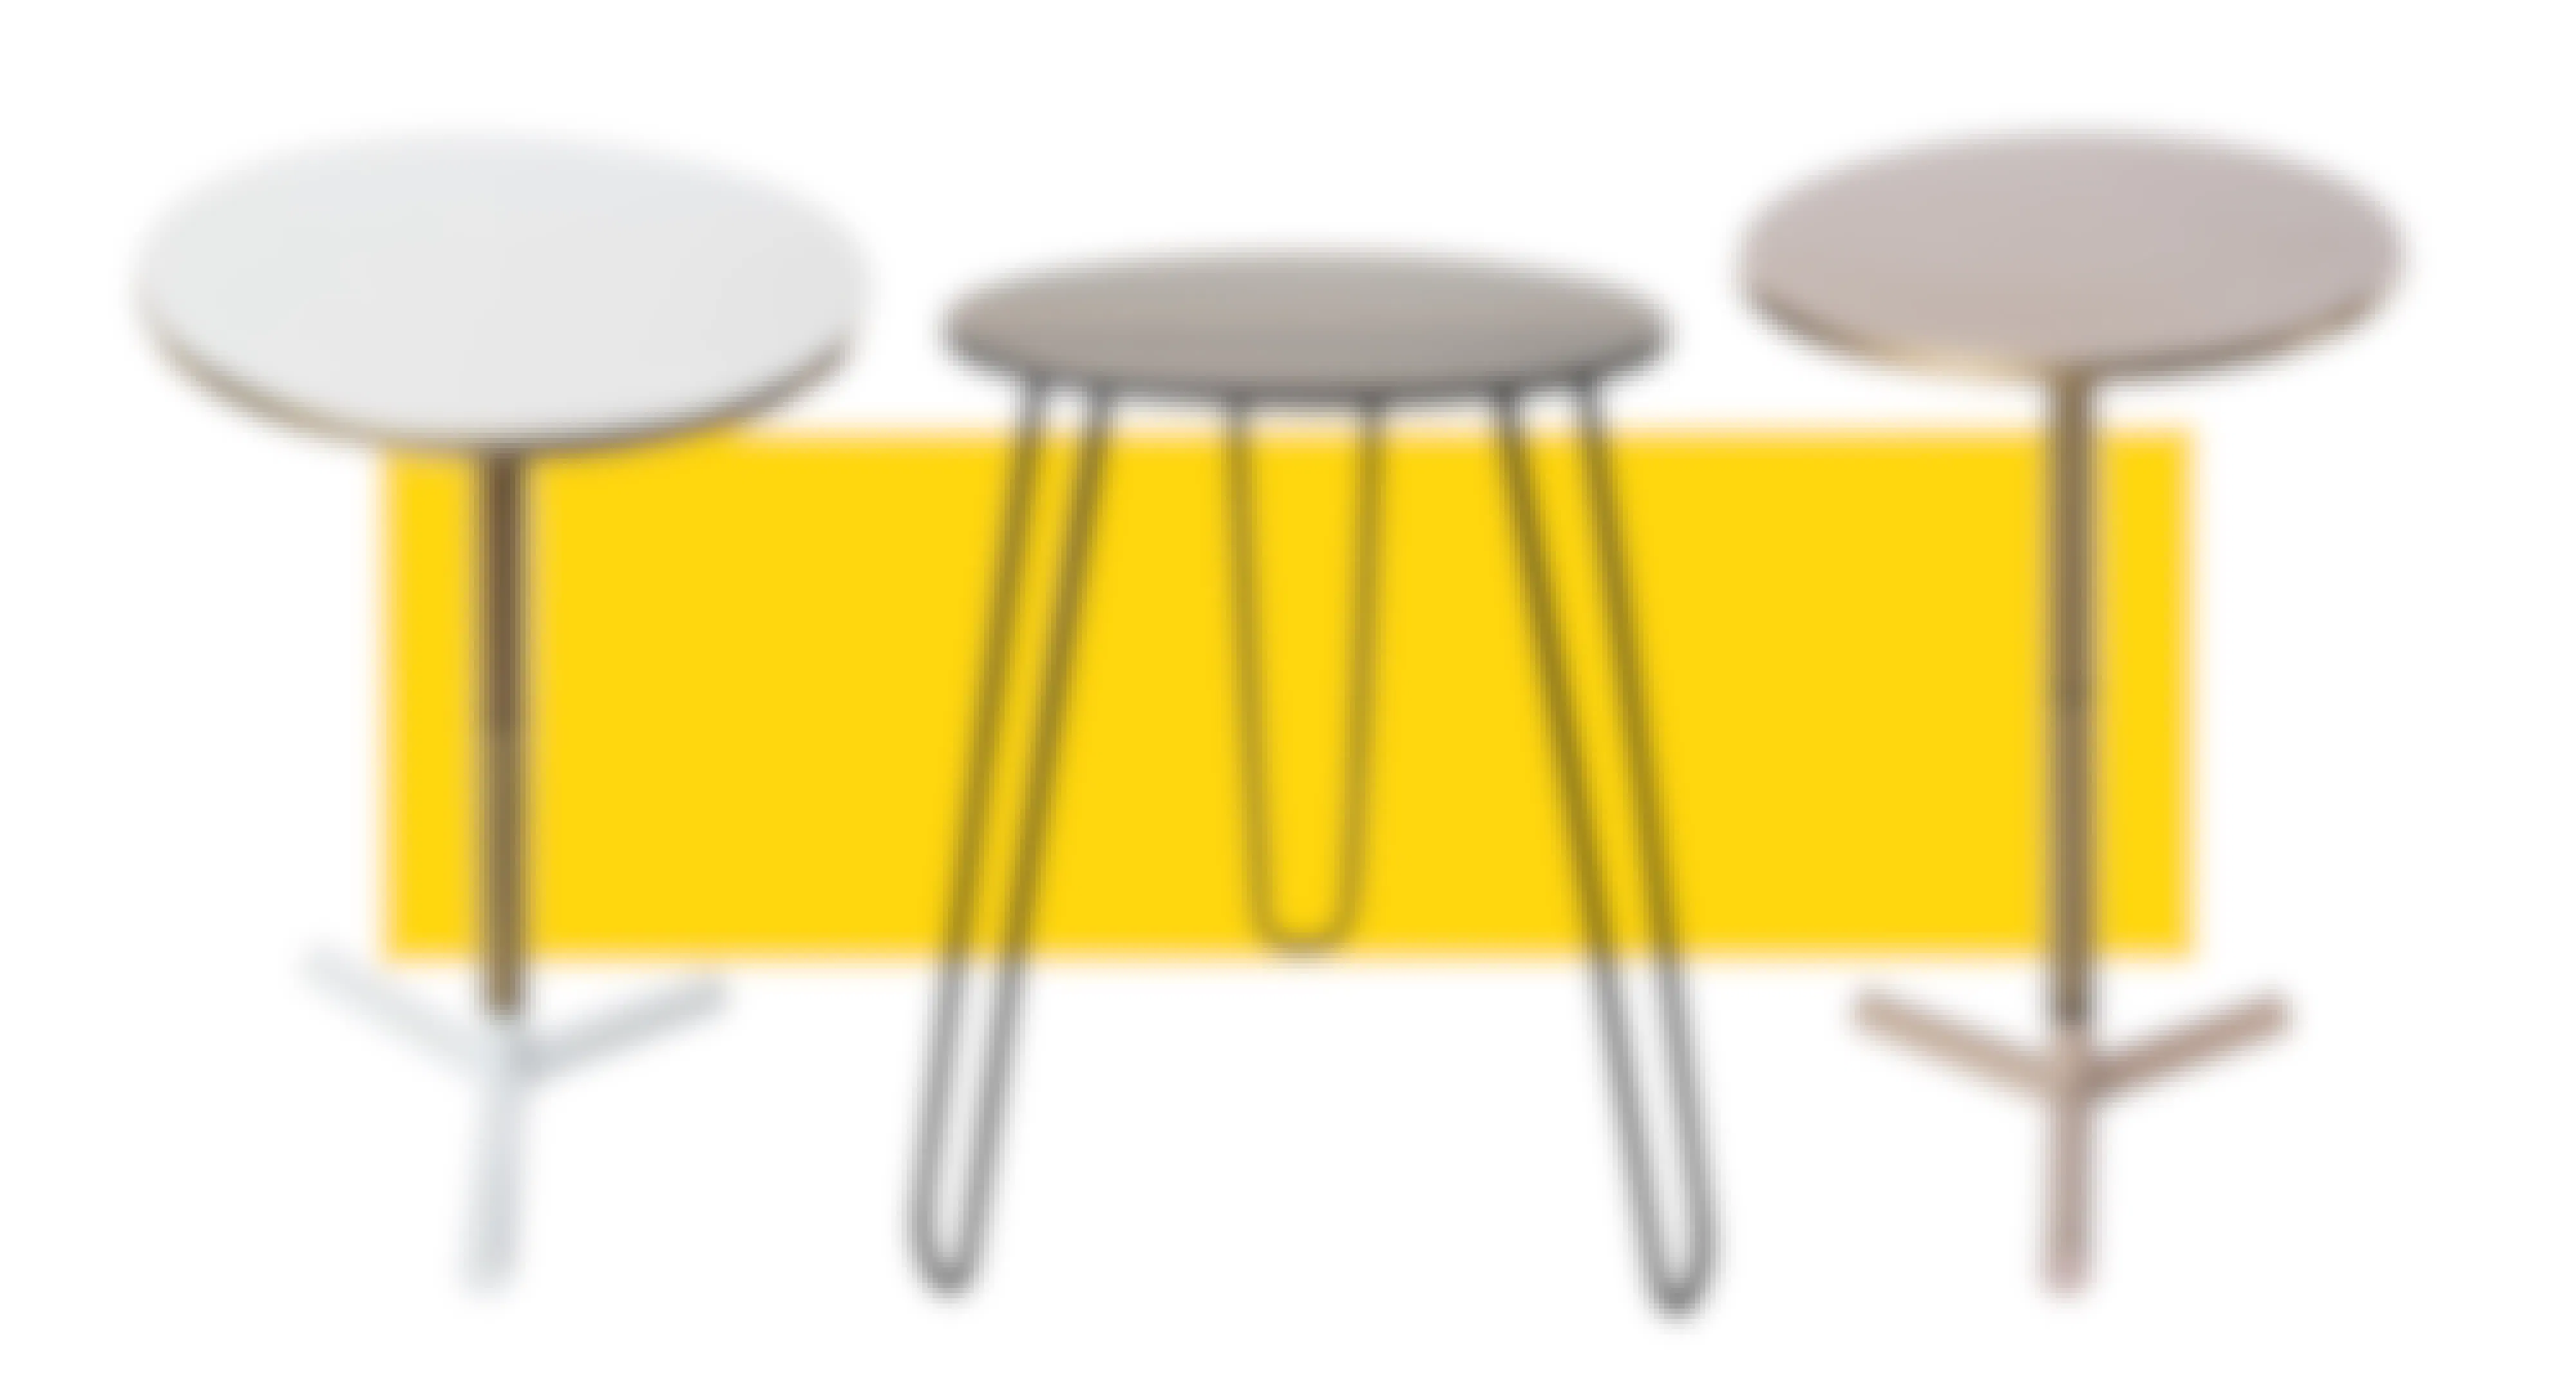 Get These Trendy Side Tables for Just $5.55 at Five Below